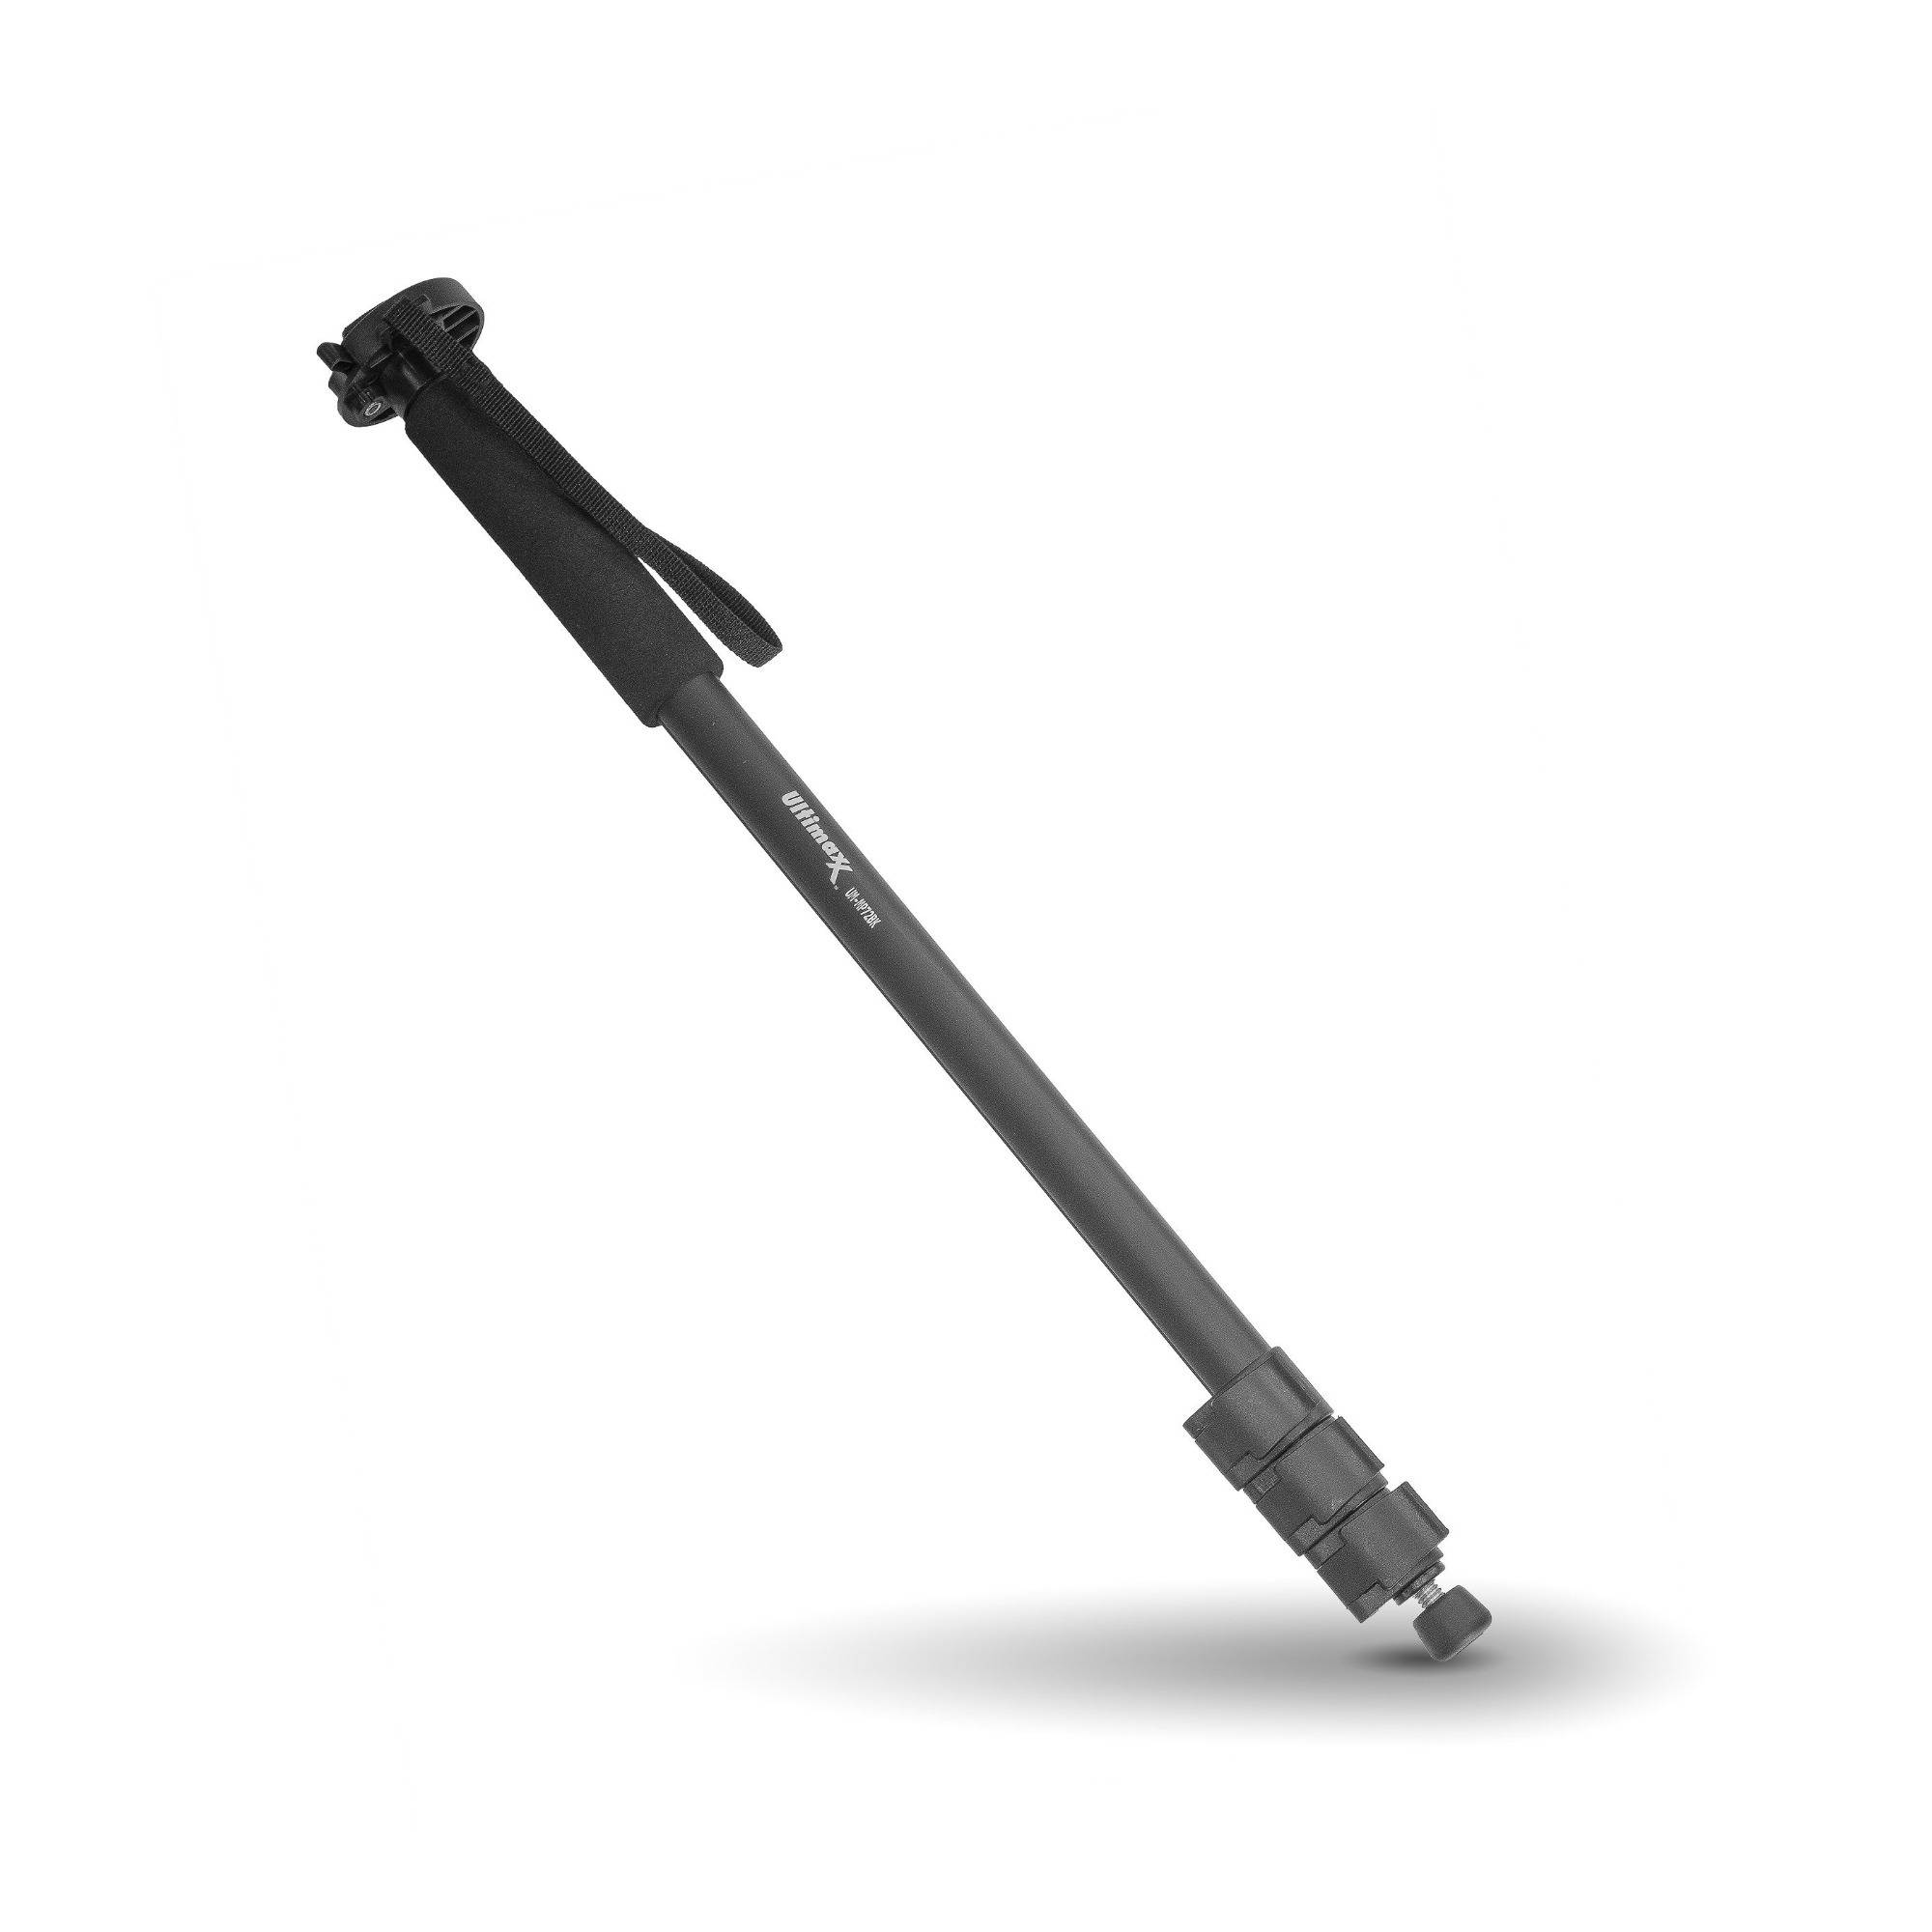 Ultimaxx 72-Inch Monopod with Quick Release Mounting Plate, Secure Wrist Strap and Carrying Case